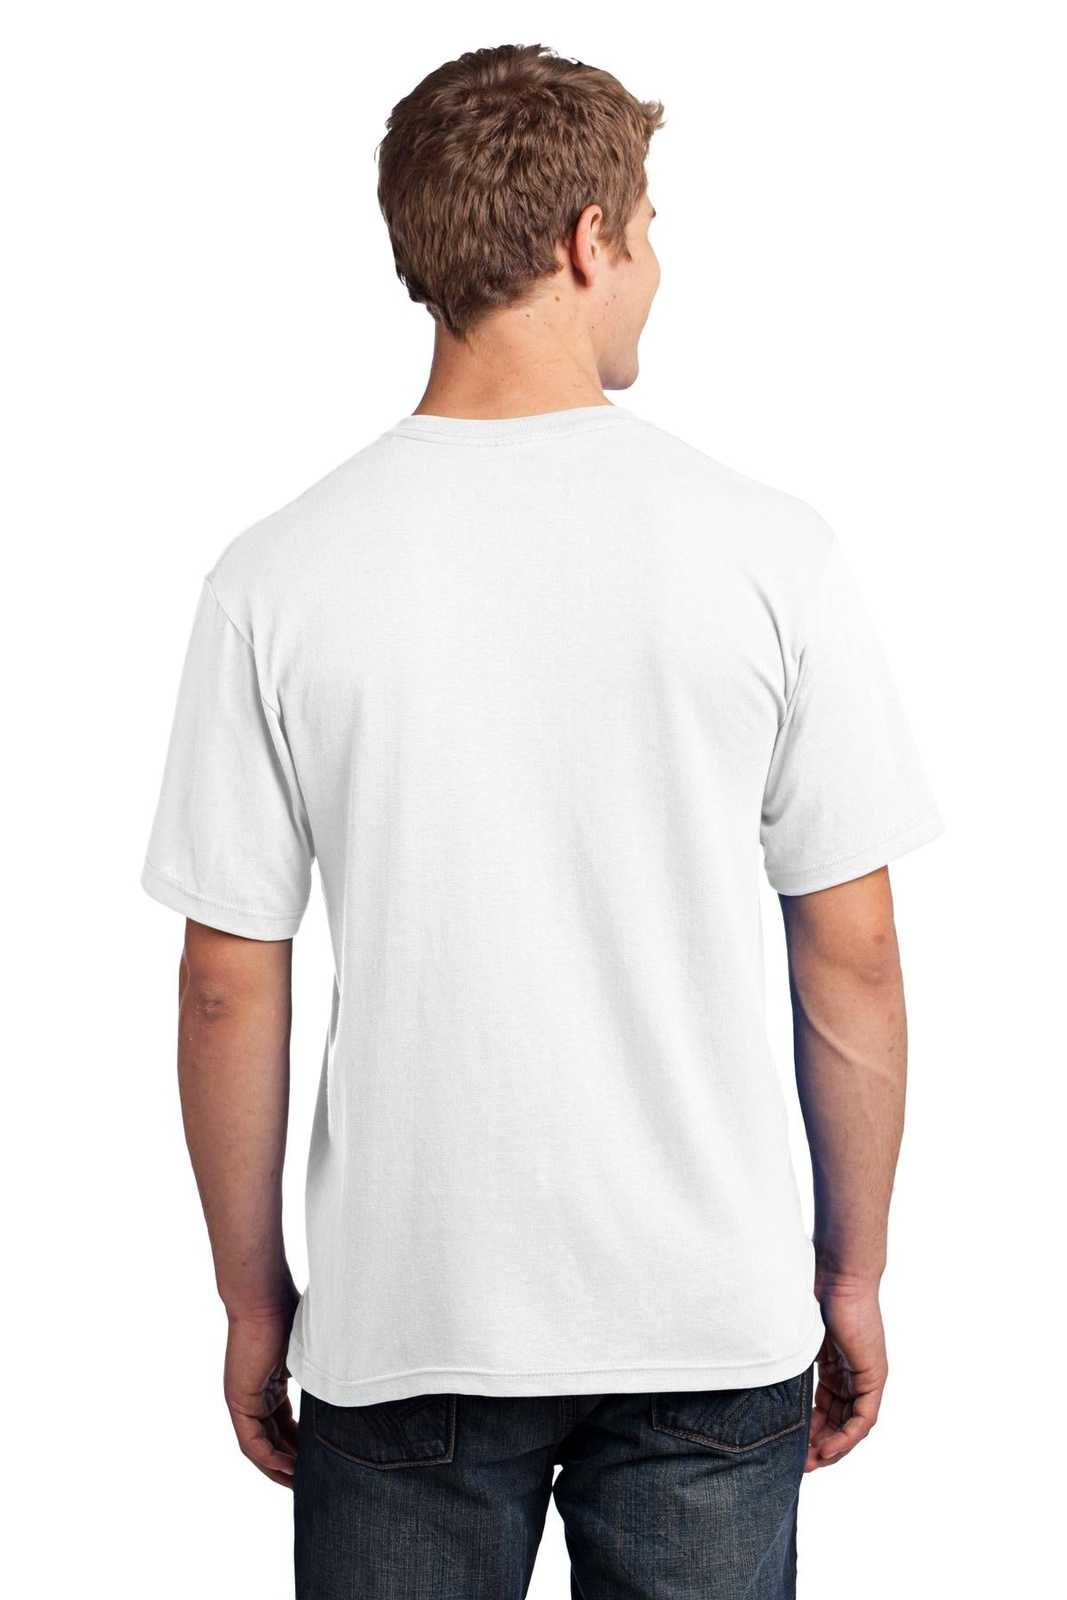 Port &amp; Company USA100 All-American Tee - White - HIT a Double - 2